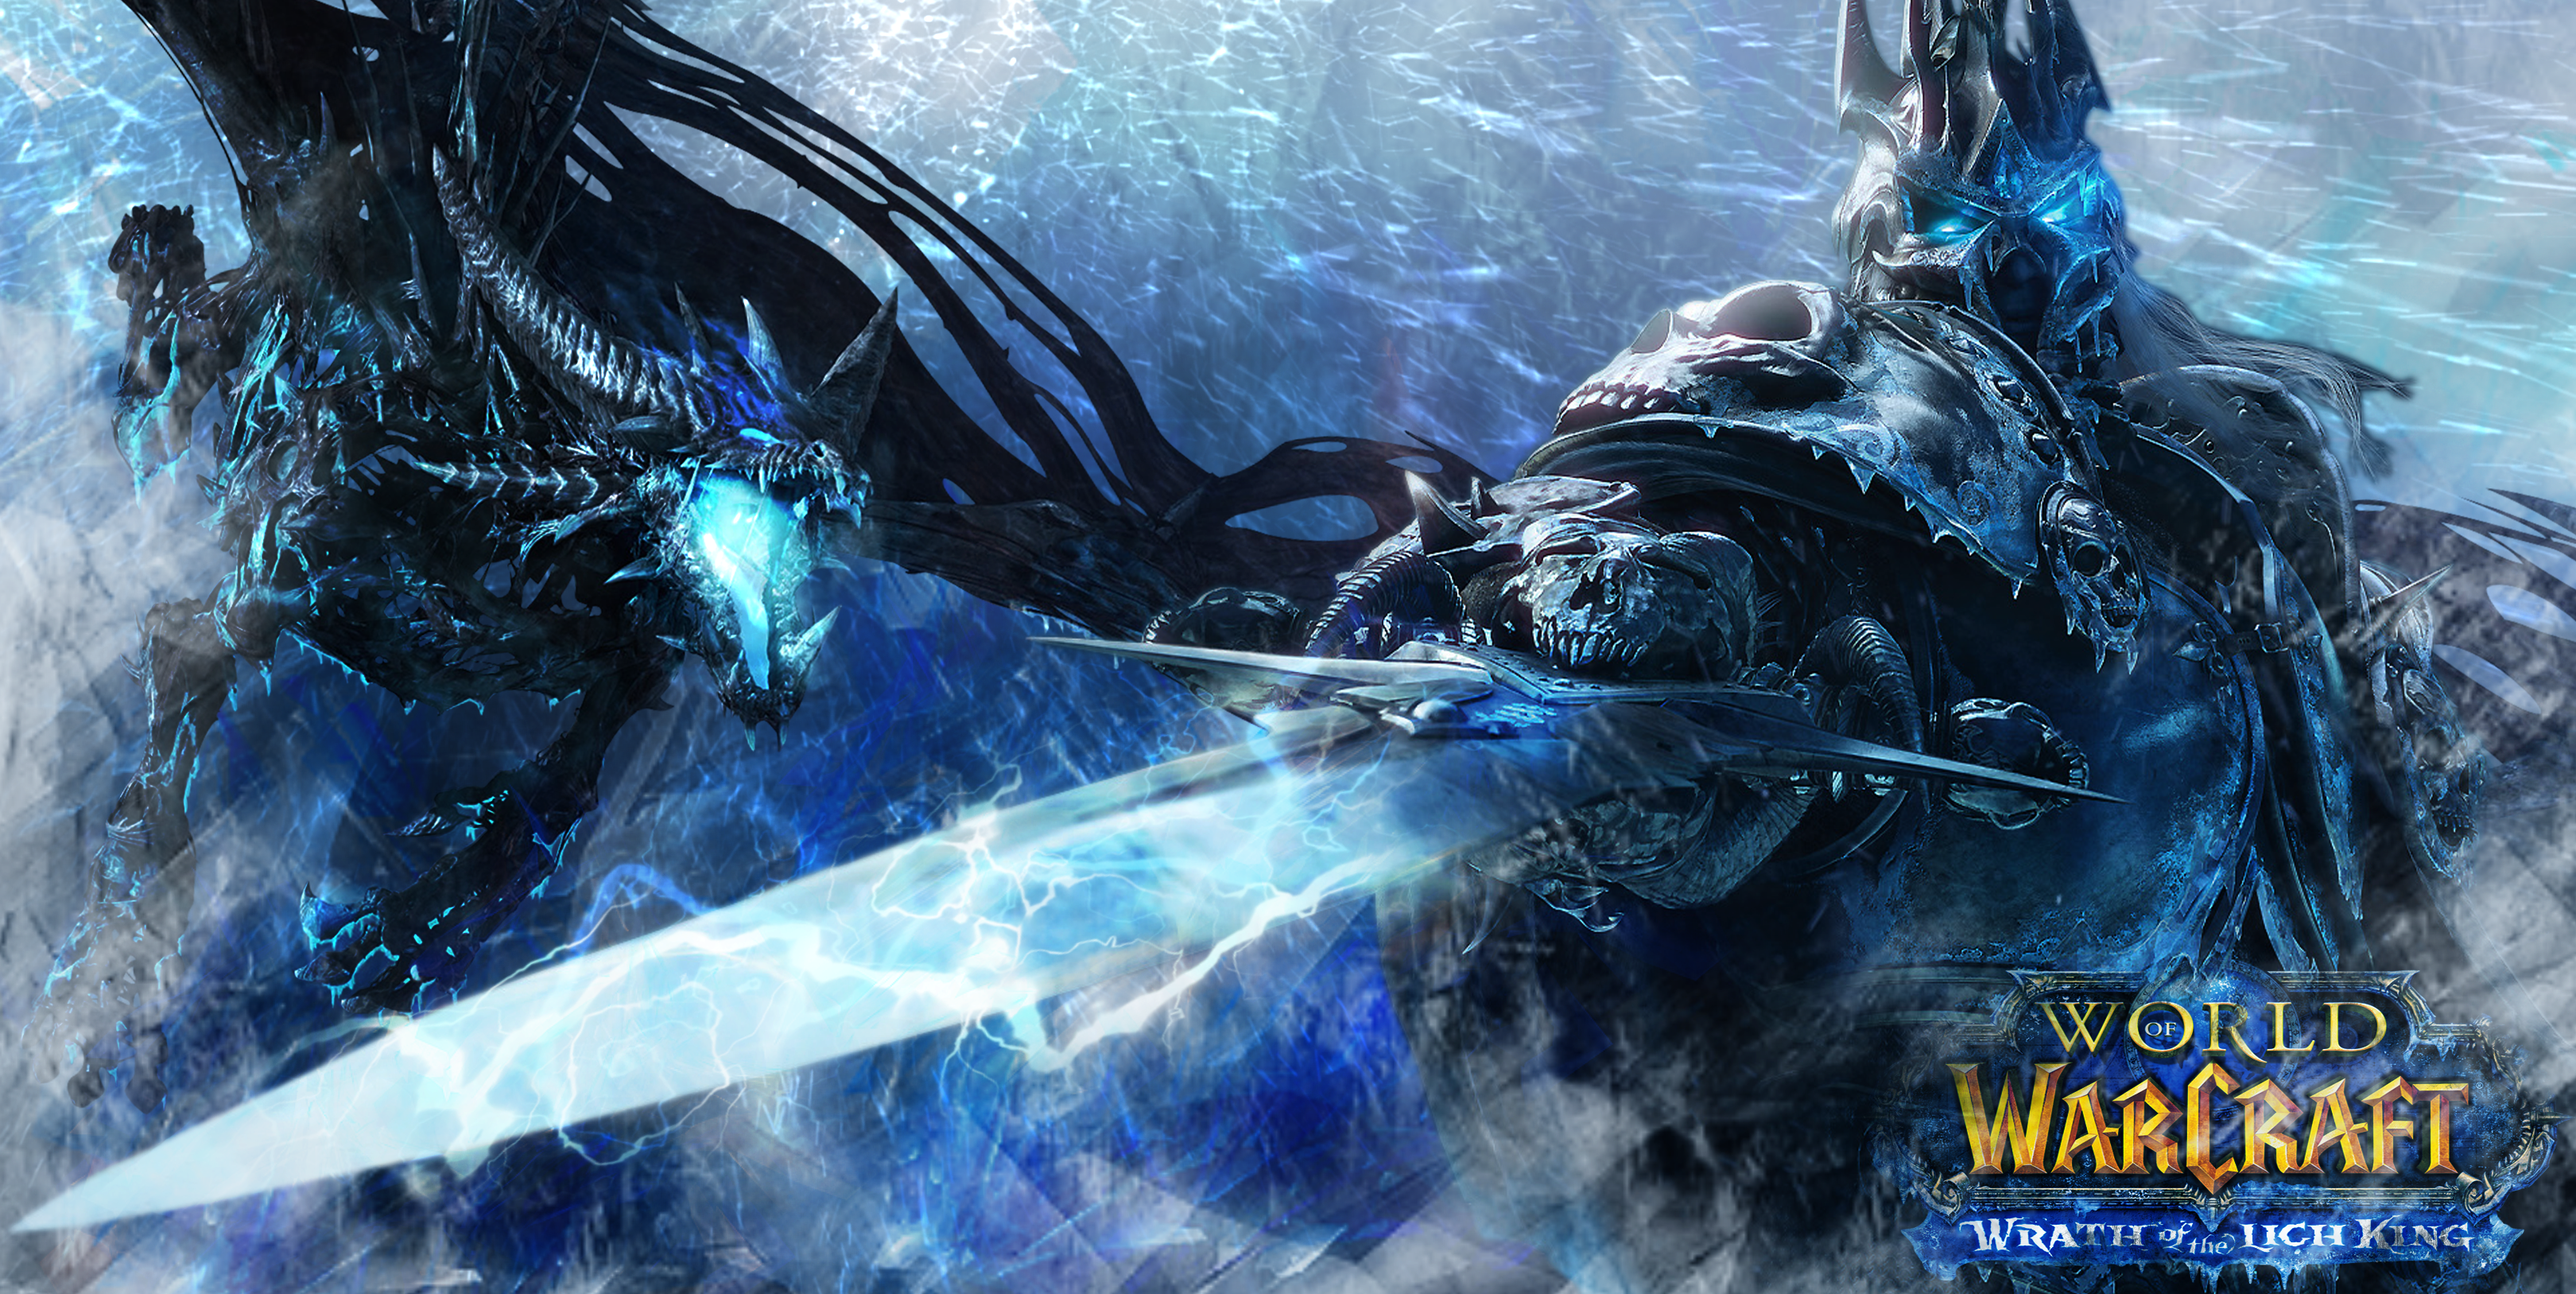 World of Warcraft: Wrath of the Lich King - Wikipedia